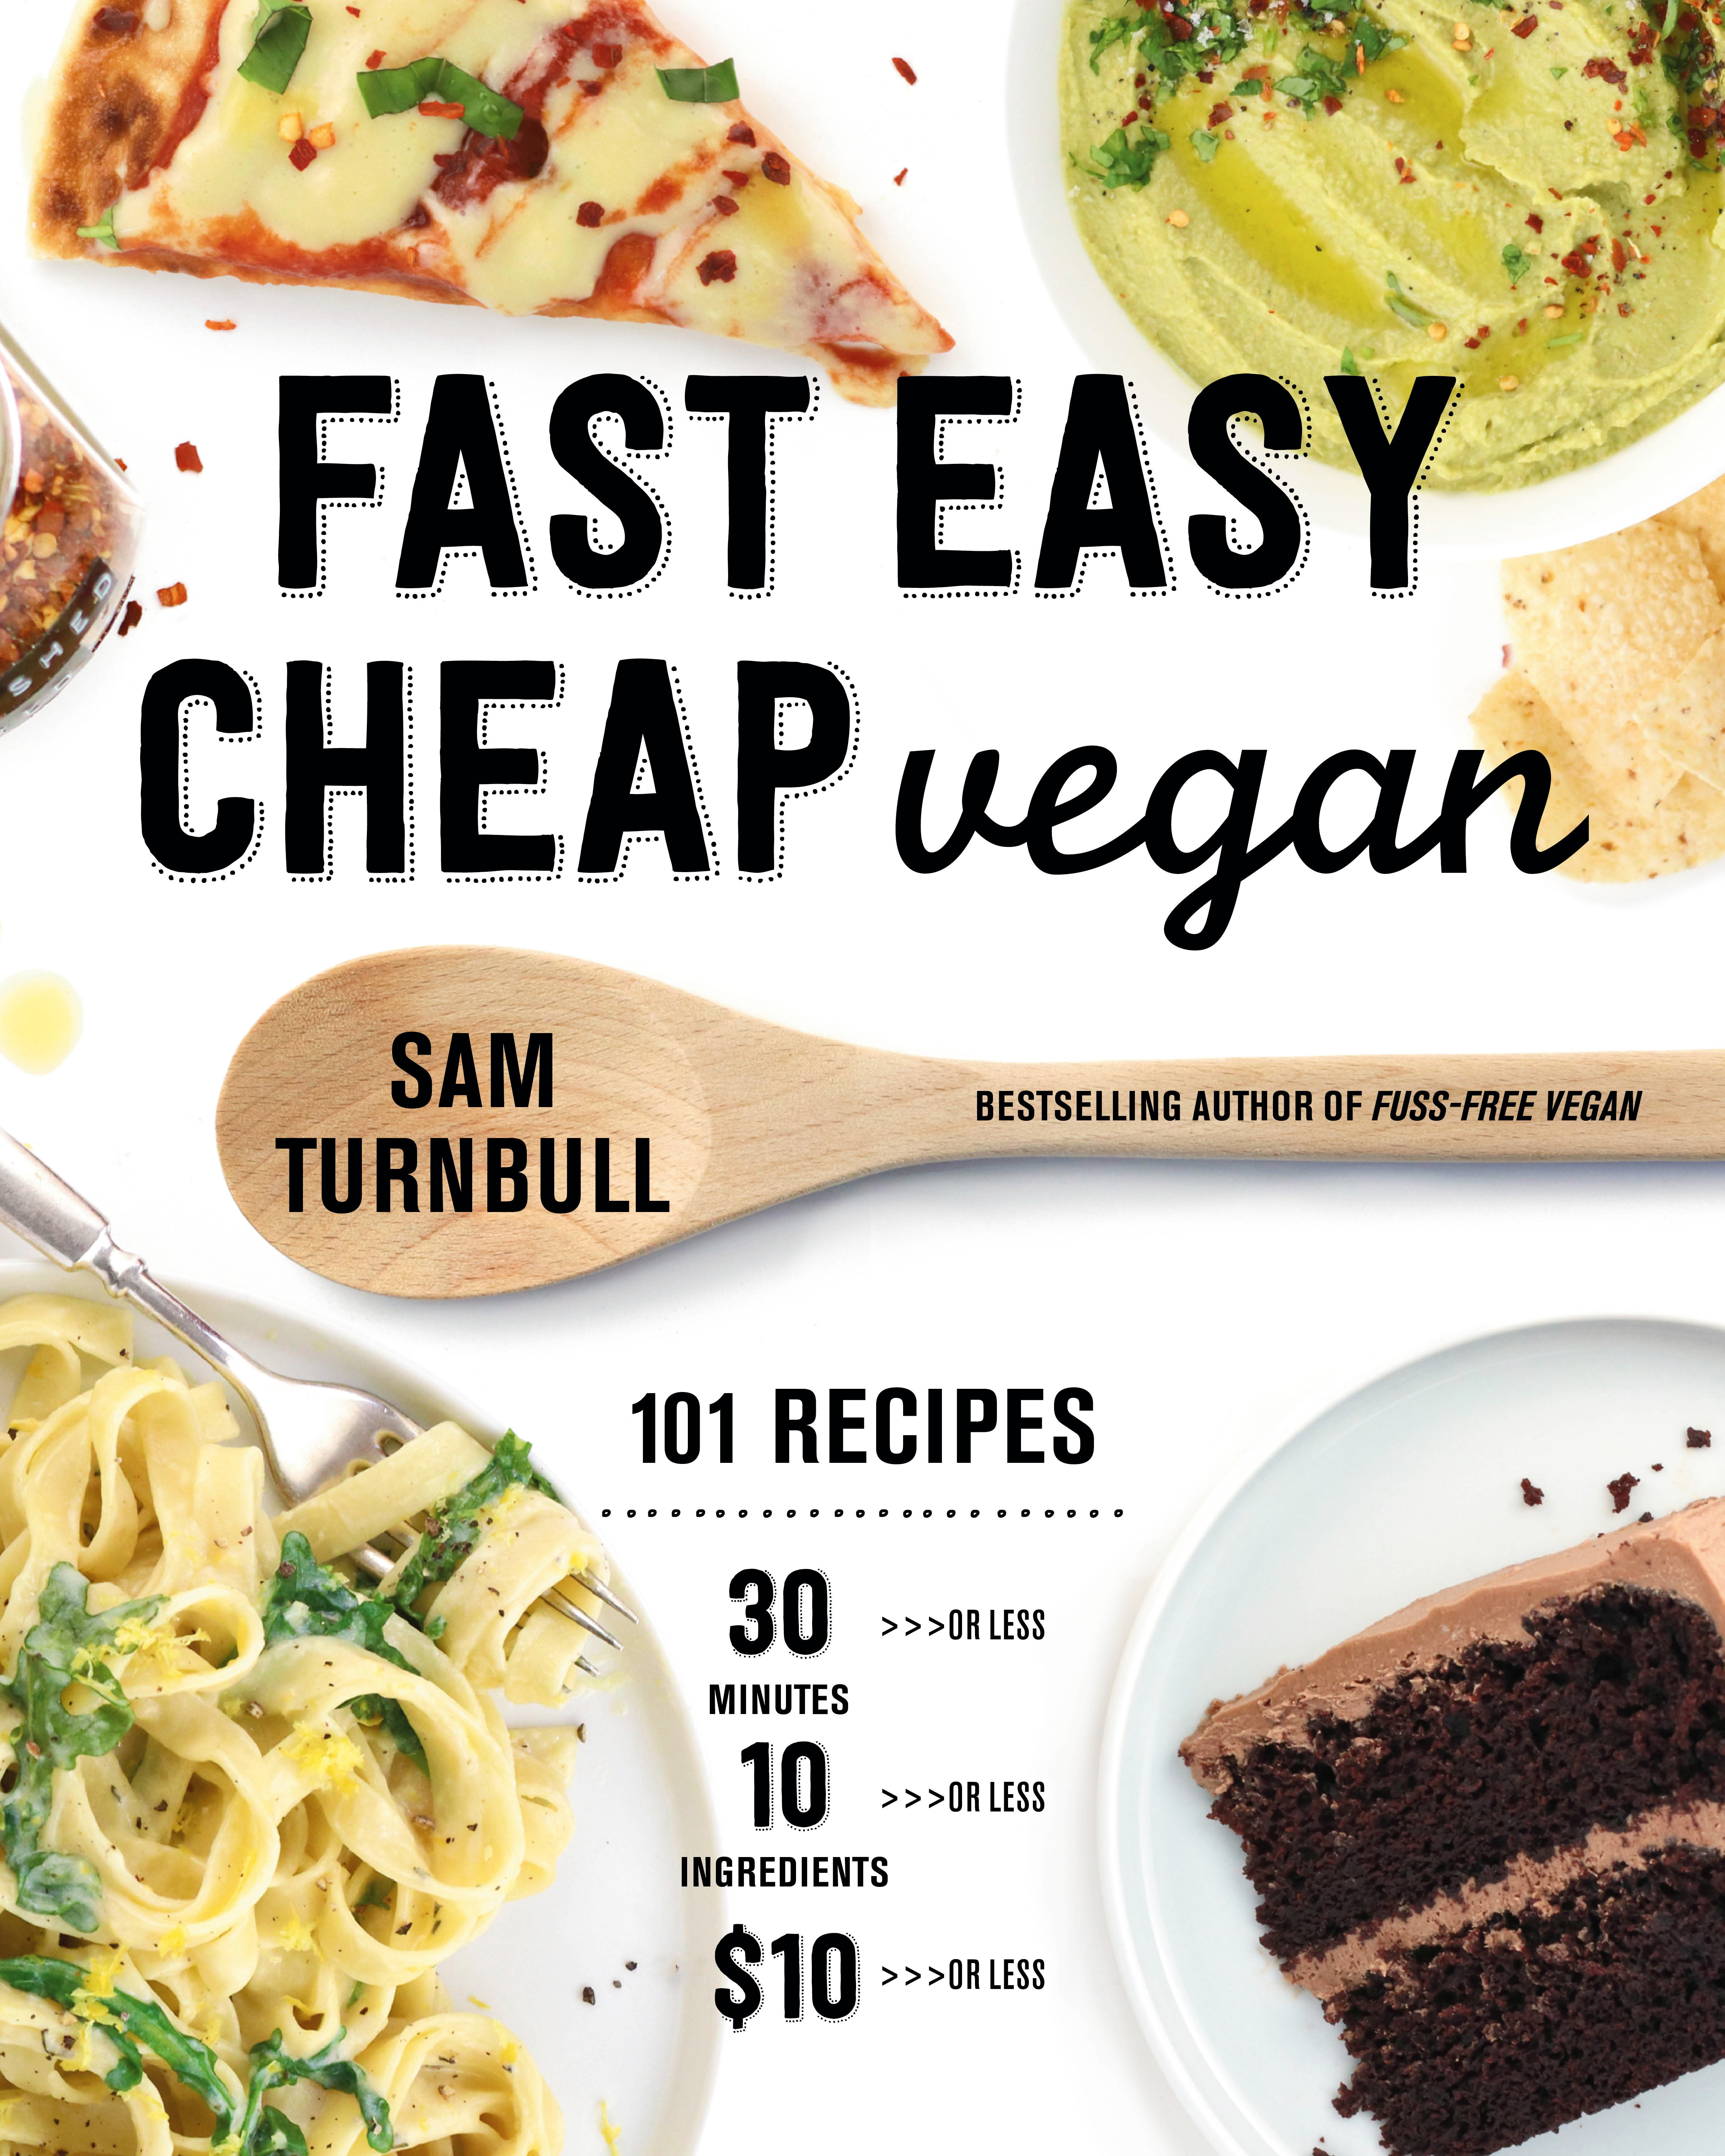 Fast Easy Cheap Vegan : 101 Recipes You Can Make in 30 Minutes or Less, for $10 or Less, and with 10 Ingredients or Less! | Turnbull, Sam